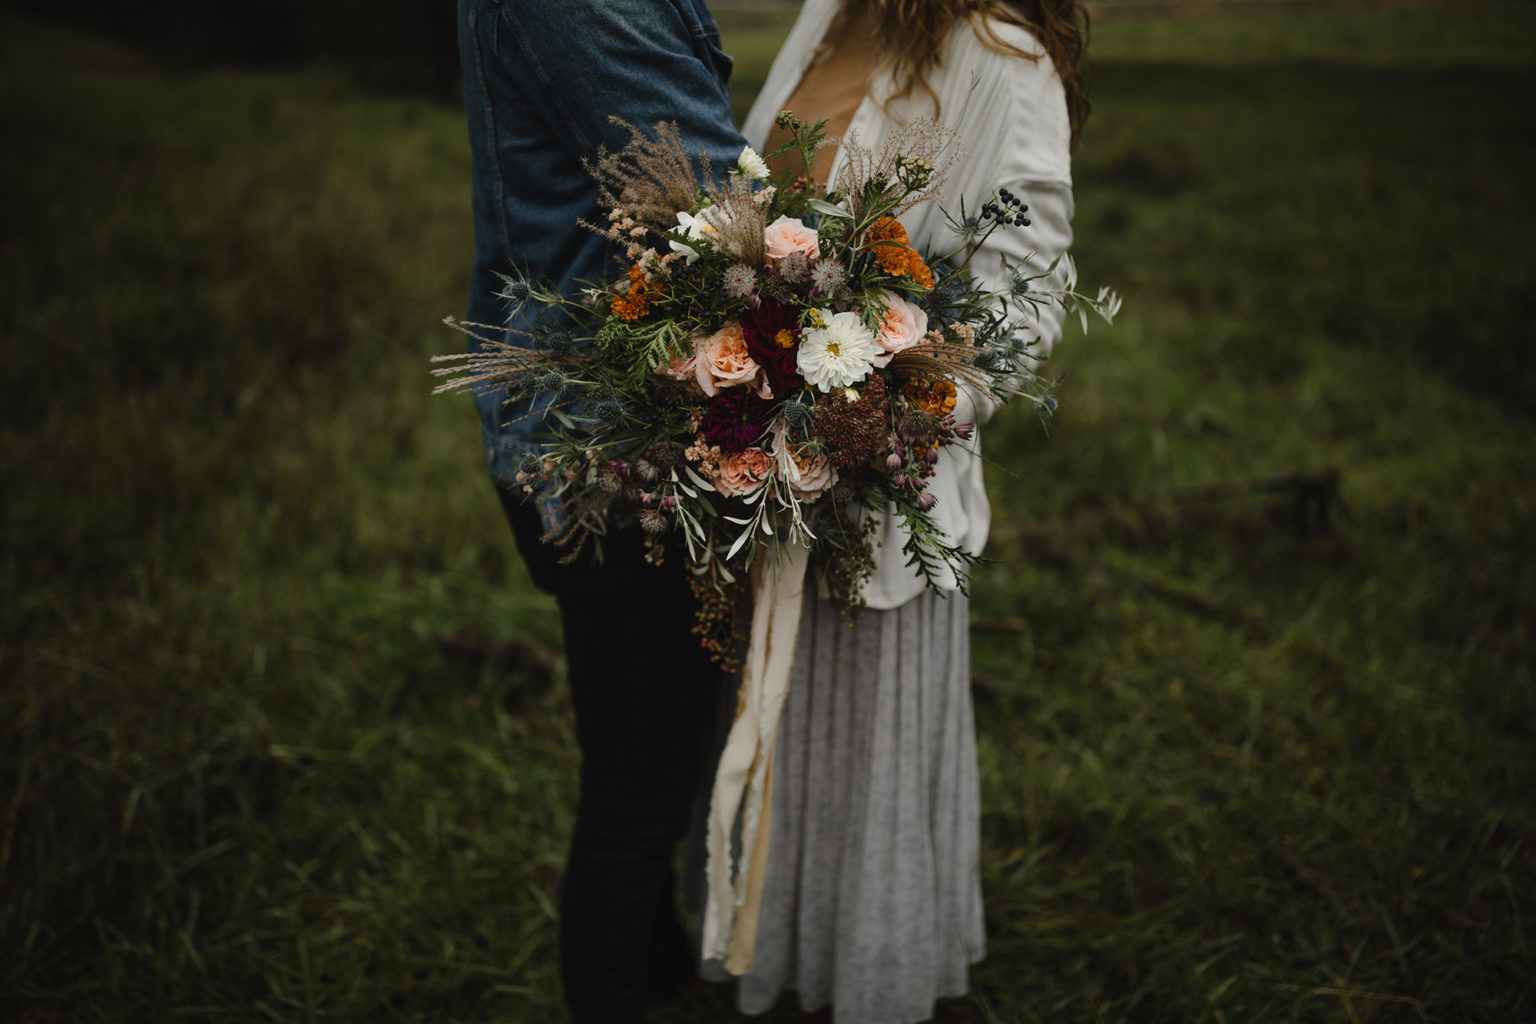 Couple eloping with bride holding bridal bouquet